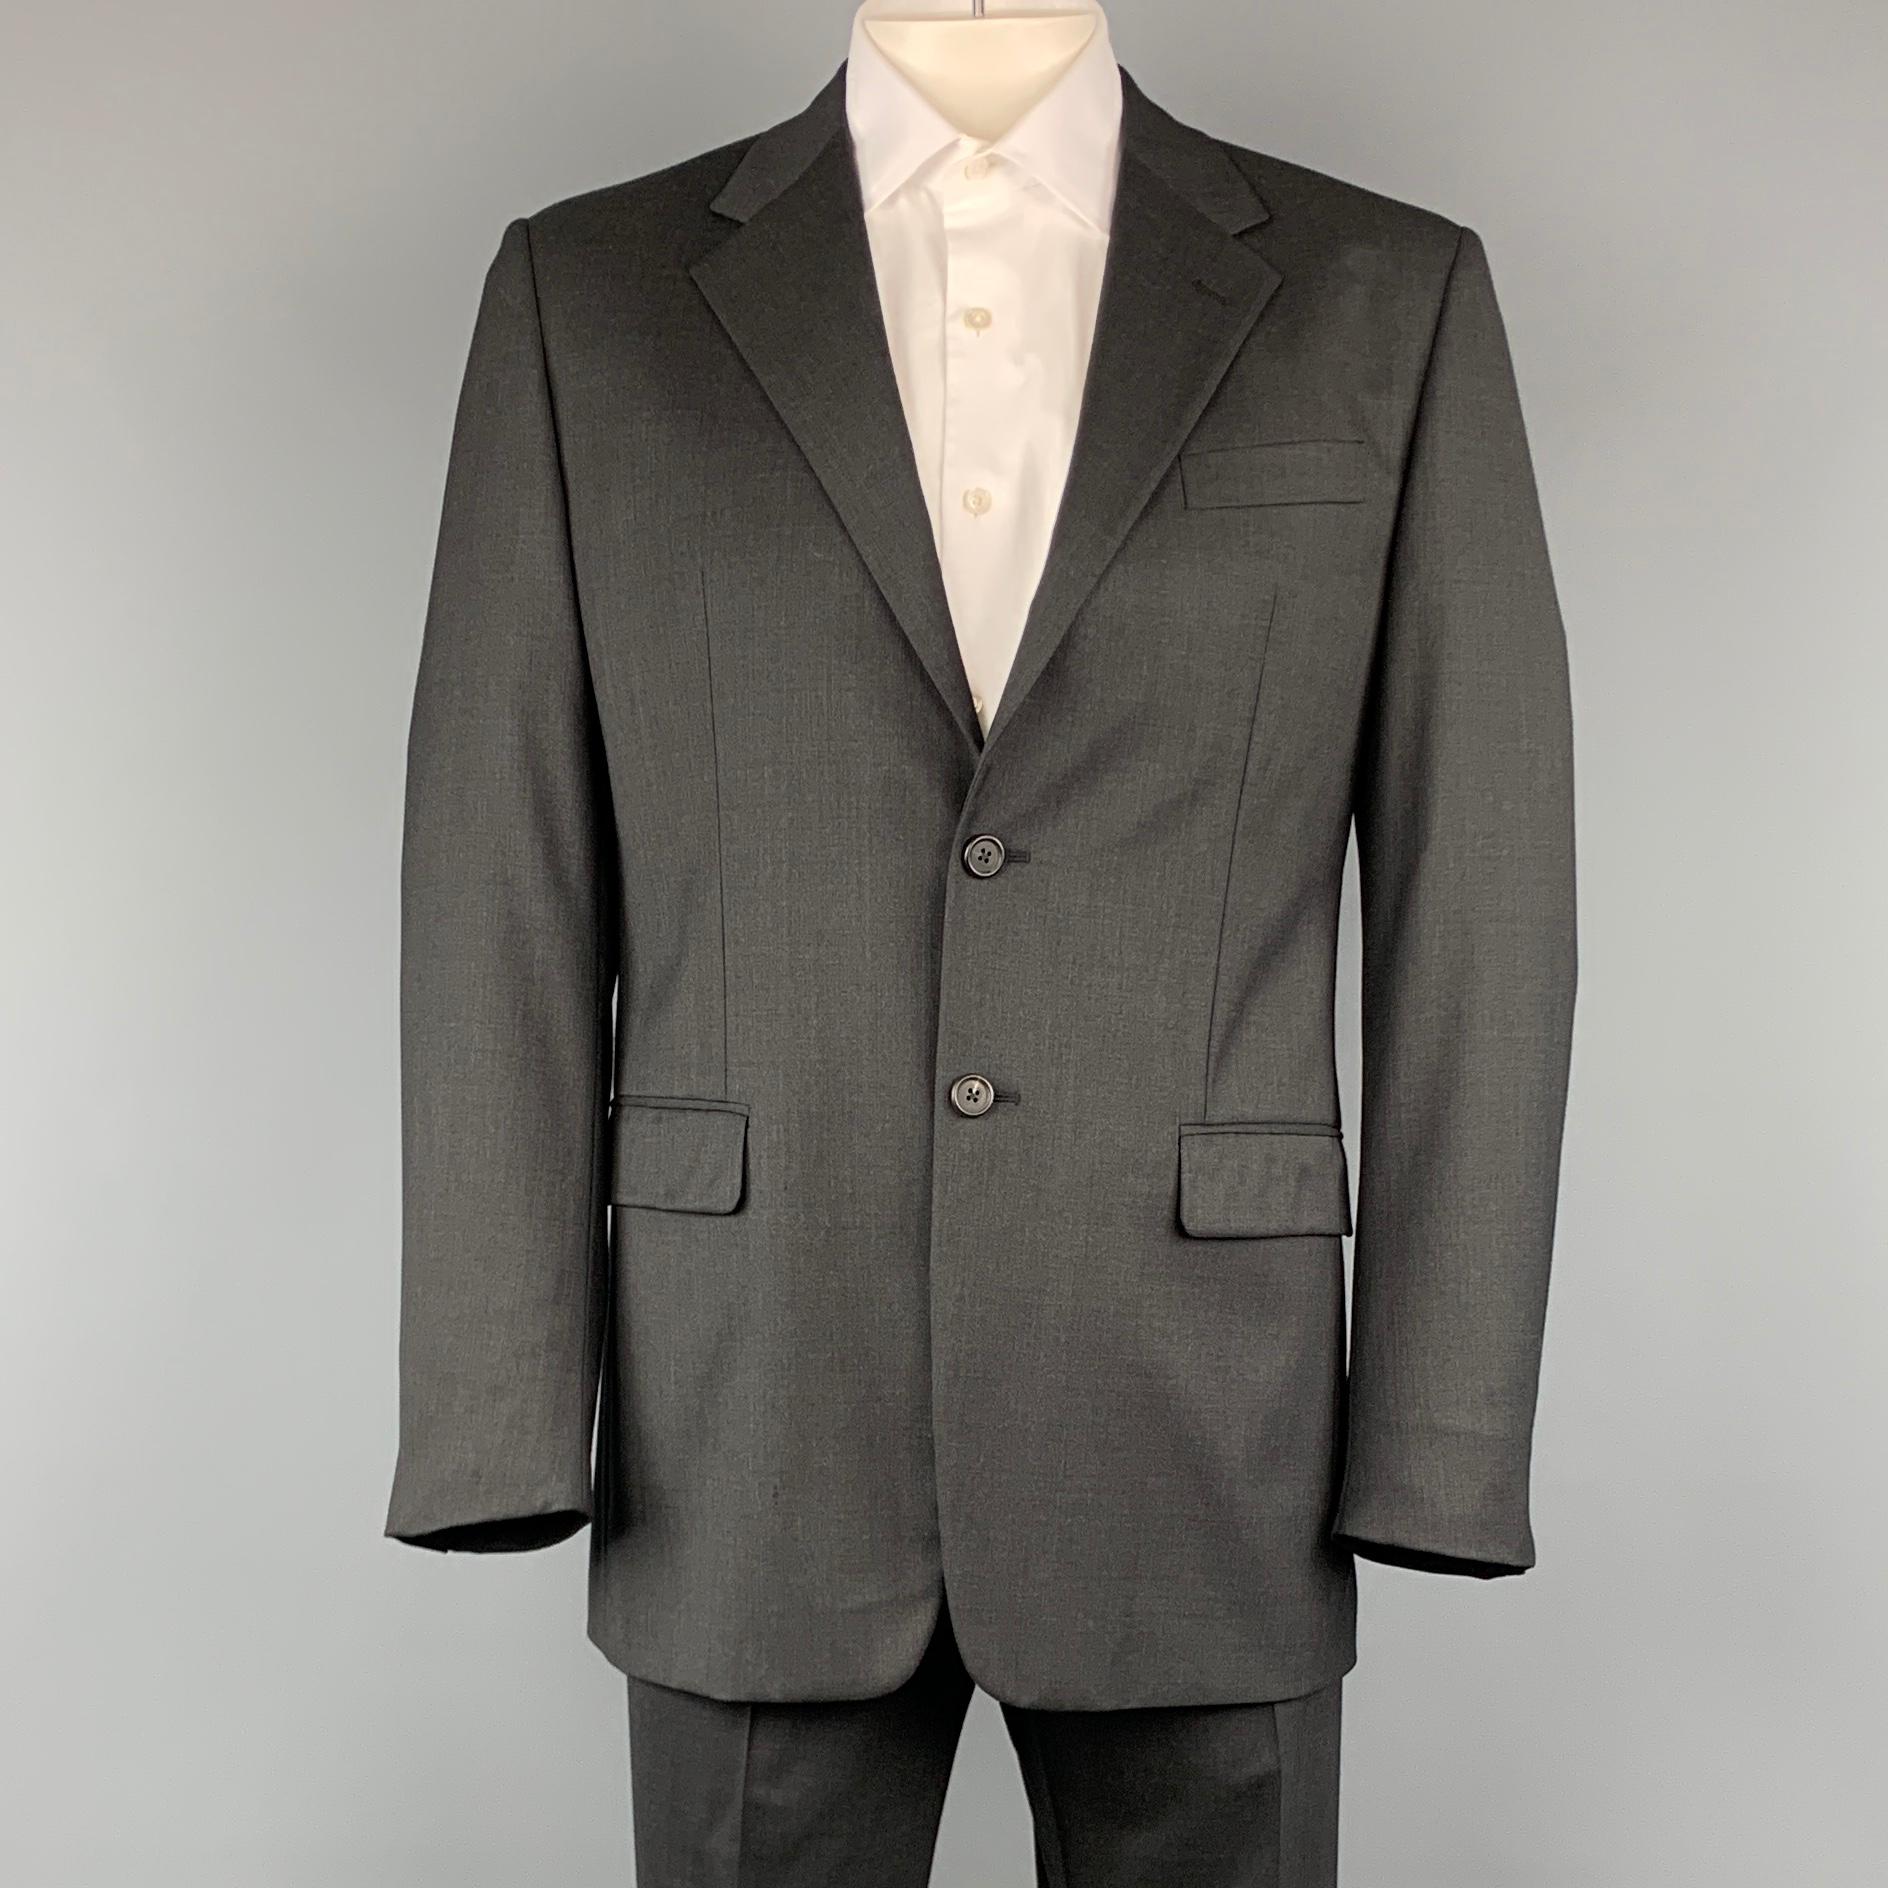 PRADA suit comes in a charcoal wool and includes a single breasted, two button sport coat with a notch lapel and matching front trousers. Made in Italy
 
Excellent Pre-Owned Condition.
Marked: 52 R
 
Measurements:
 
-Jacket
Shoulder: 19.5 in.
Chest: